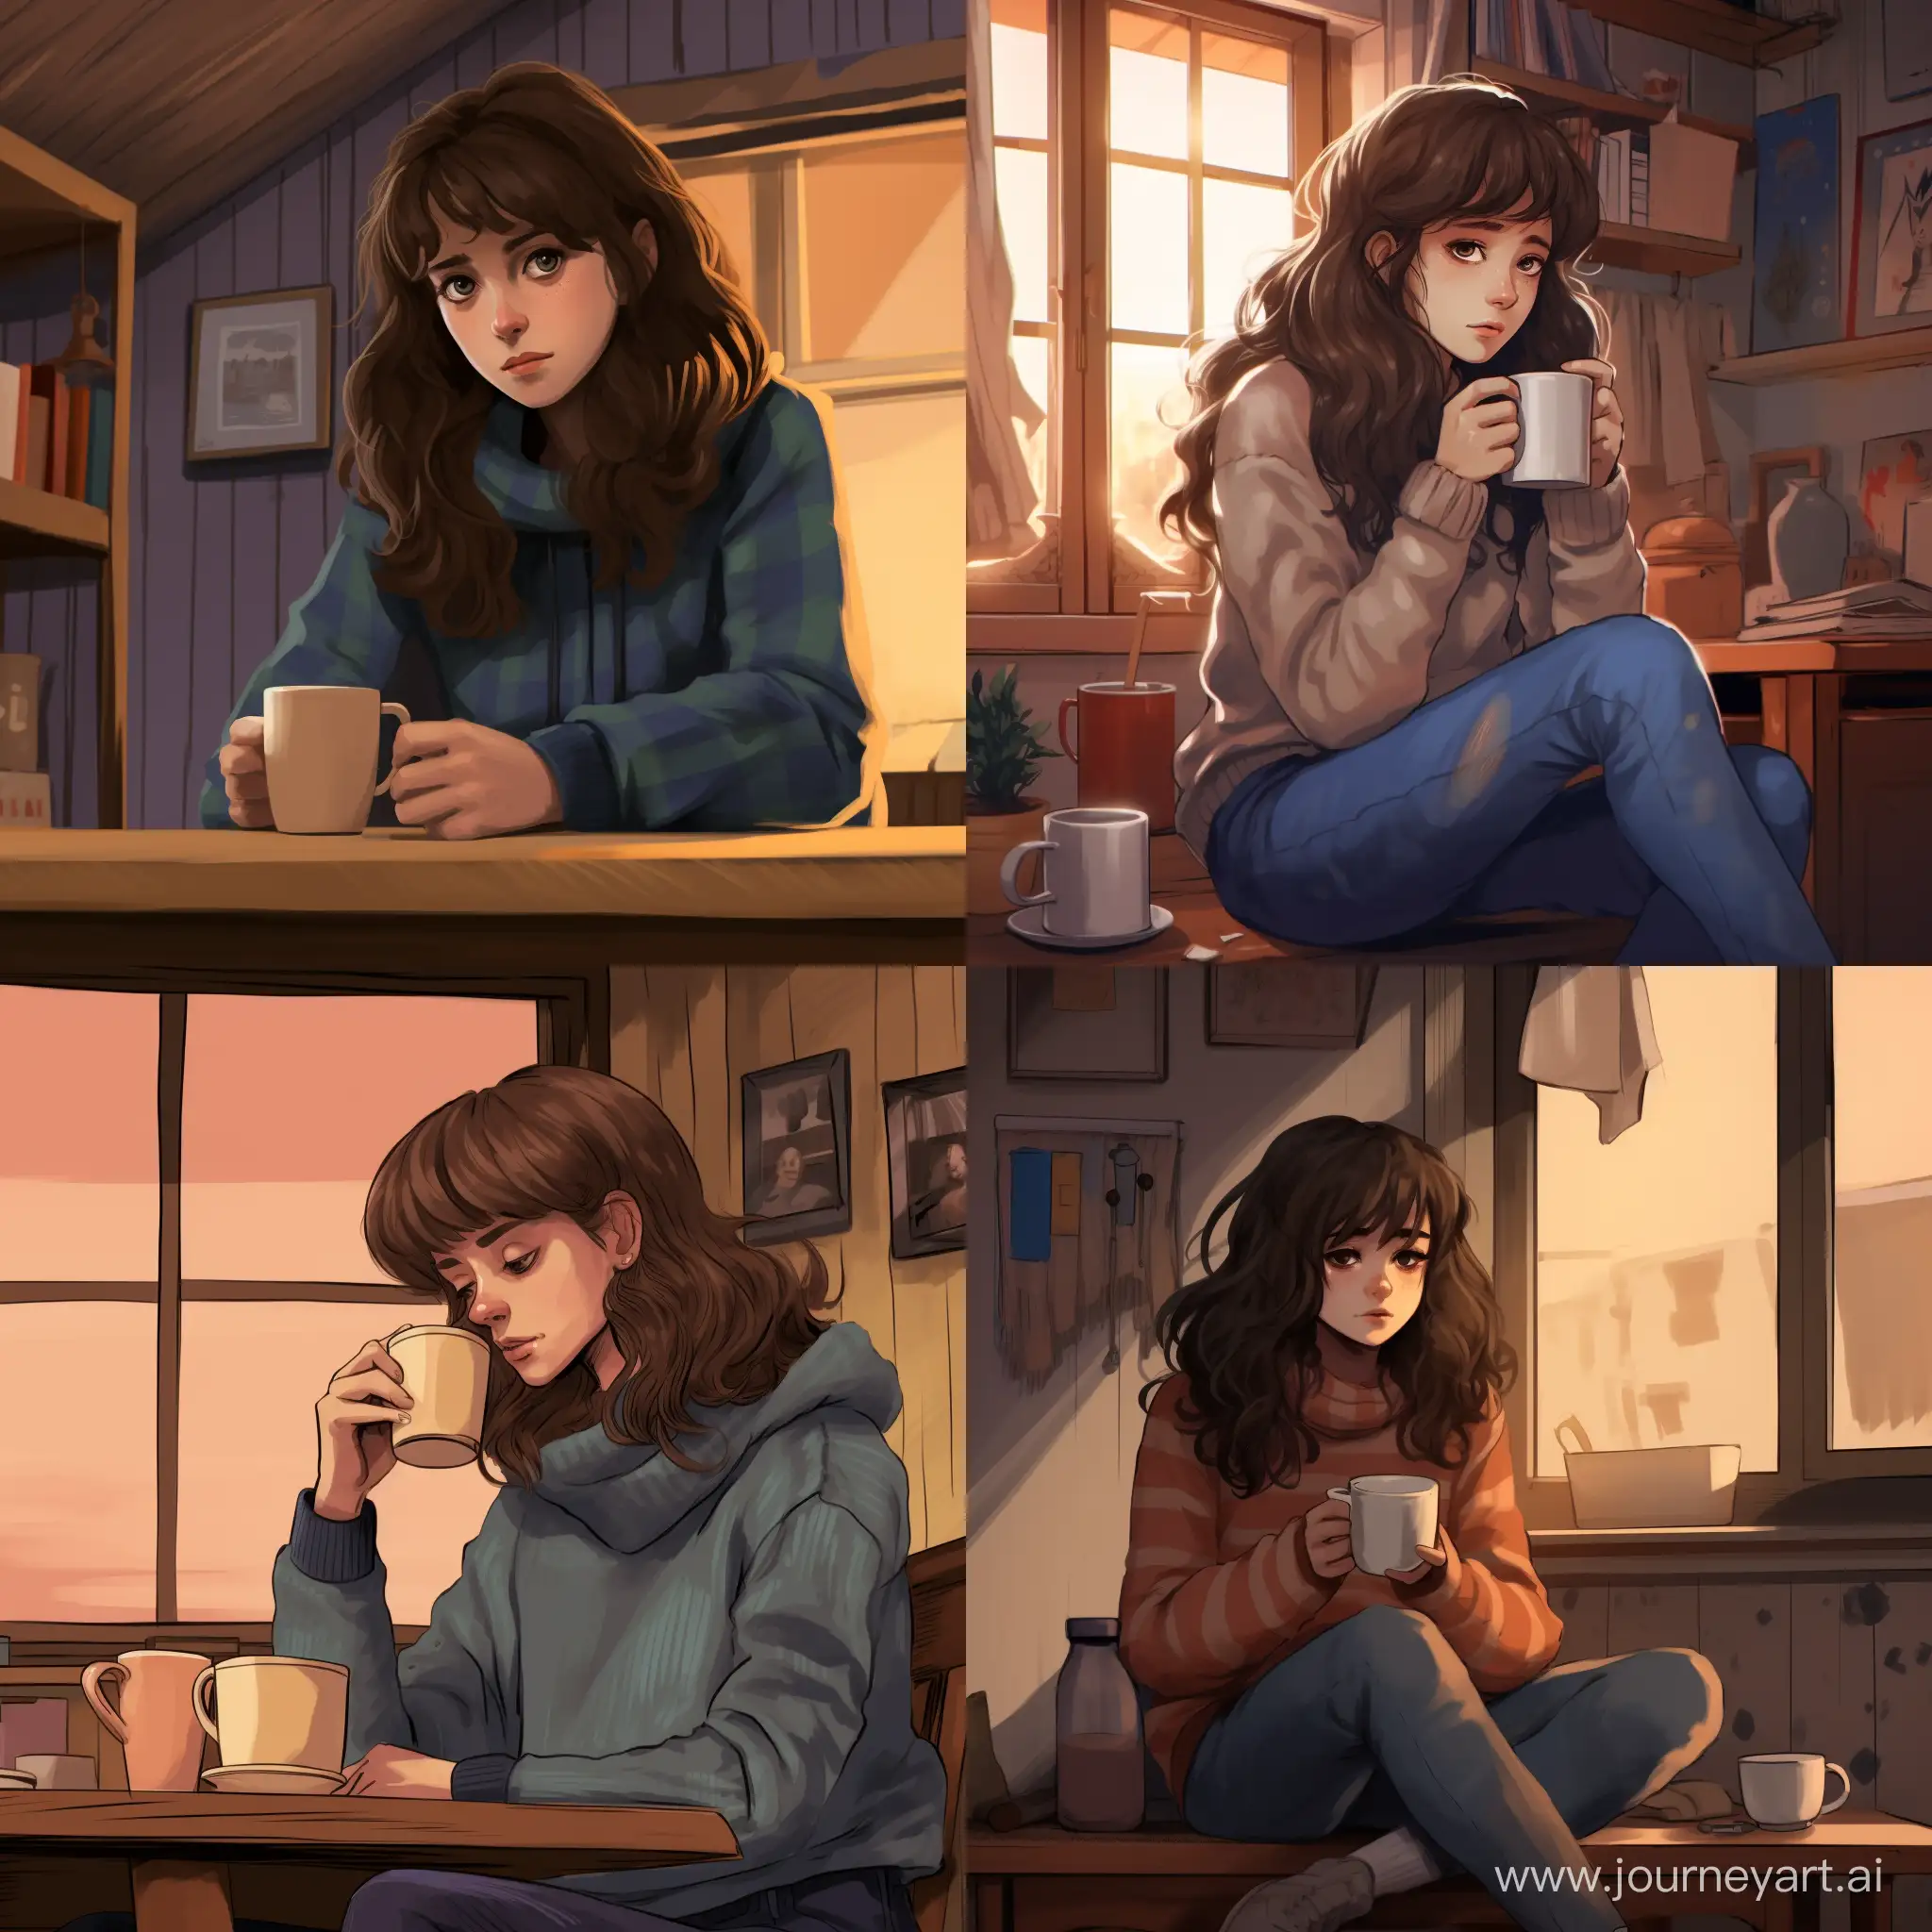 Cozy-Winter-Night-Teen-Girl-with-Blue-Curl-Enjoying-Tea-in-Wooden-House